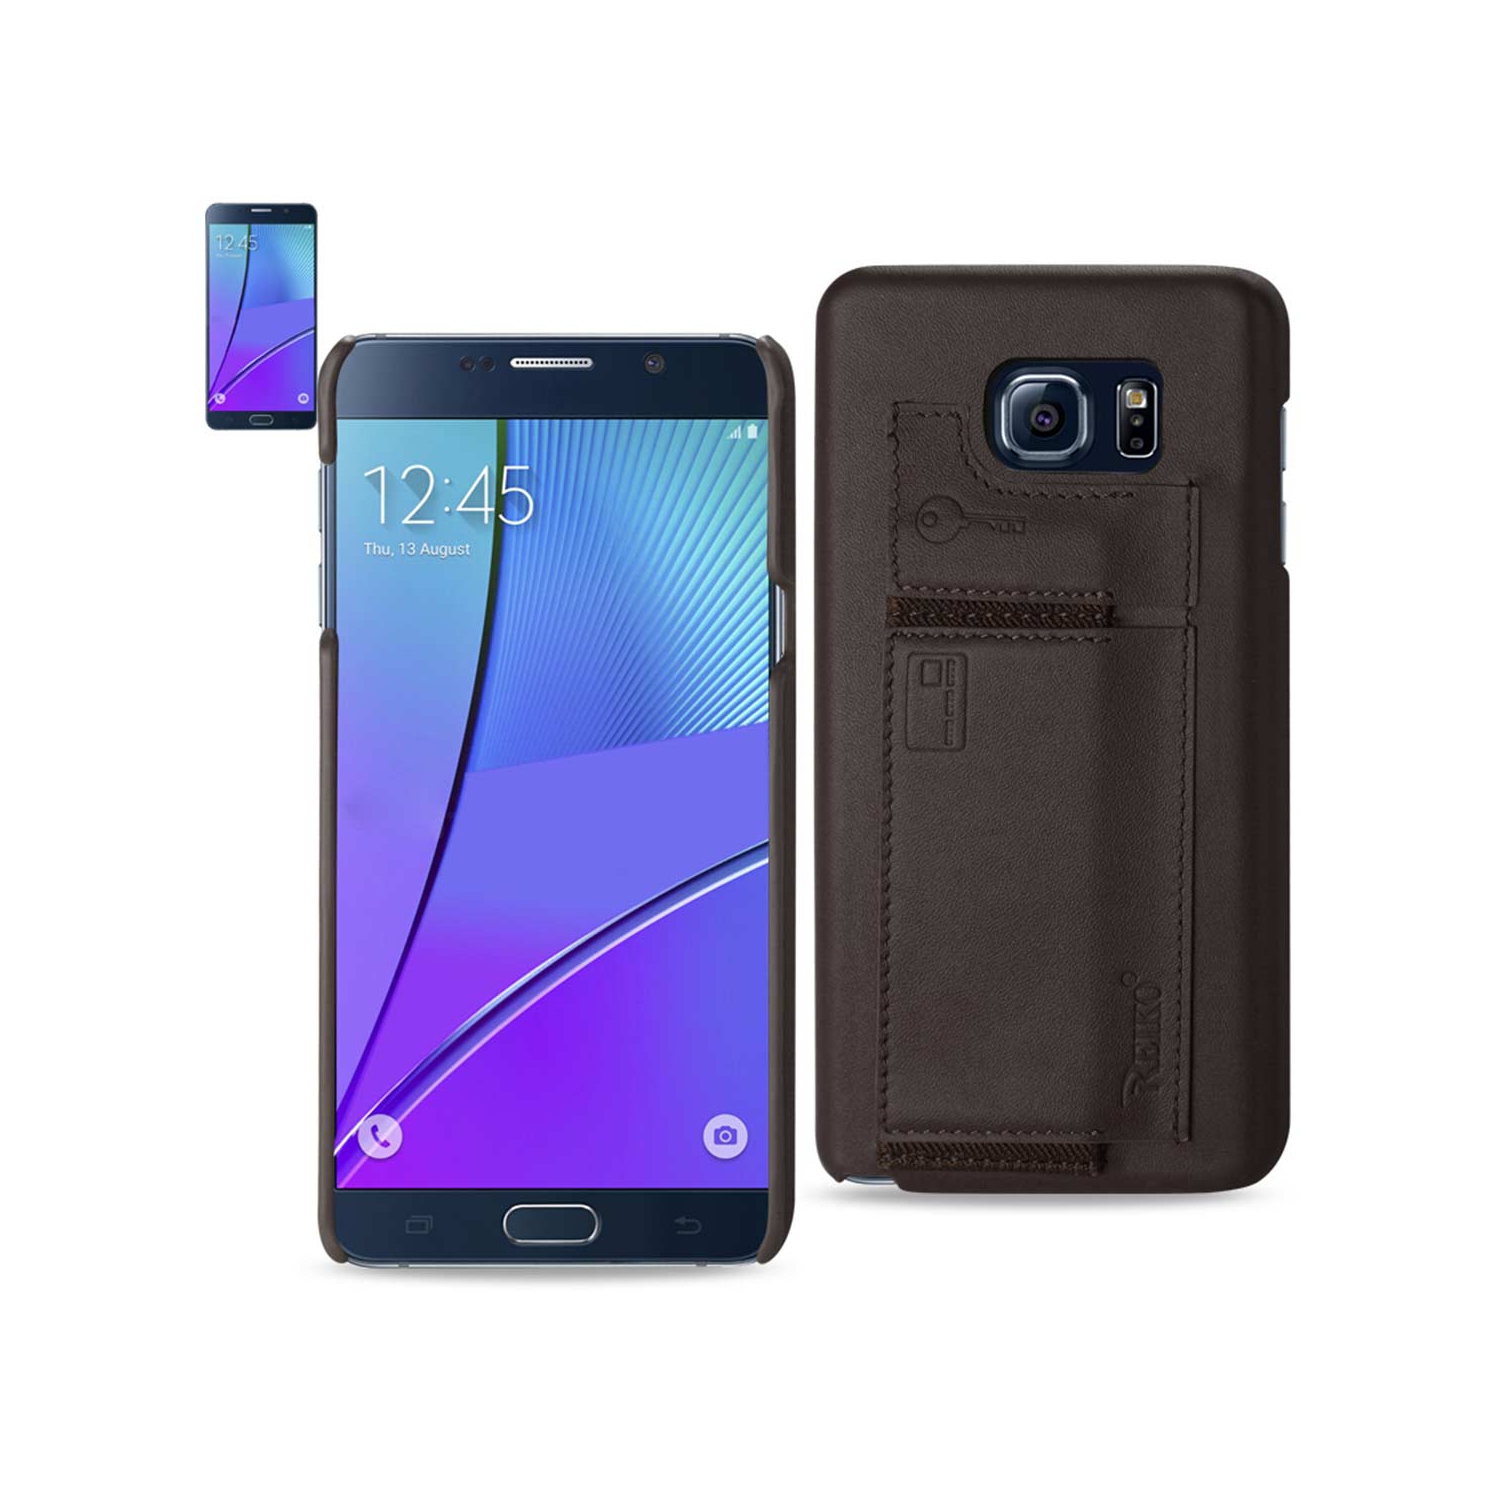 Reiko Samsung Galaxy Note 5 Rfid Genuine Leather Case Protection And Key Holder